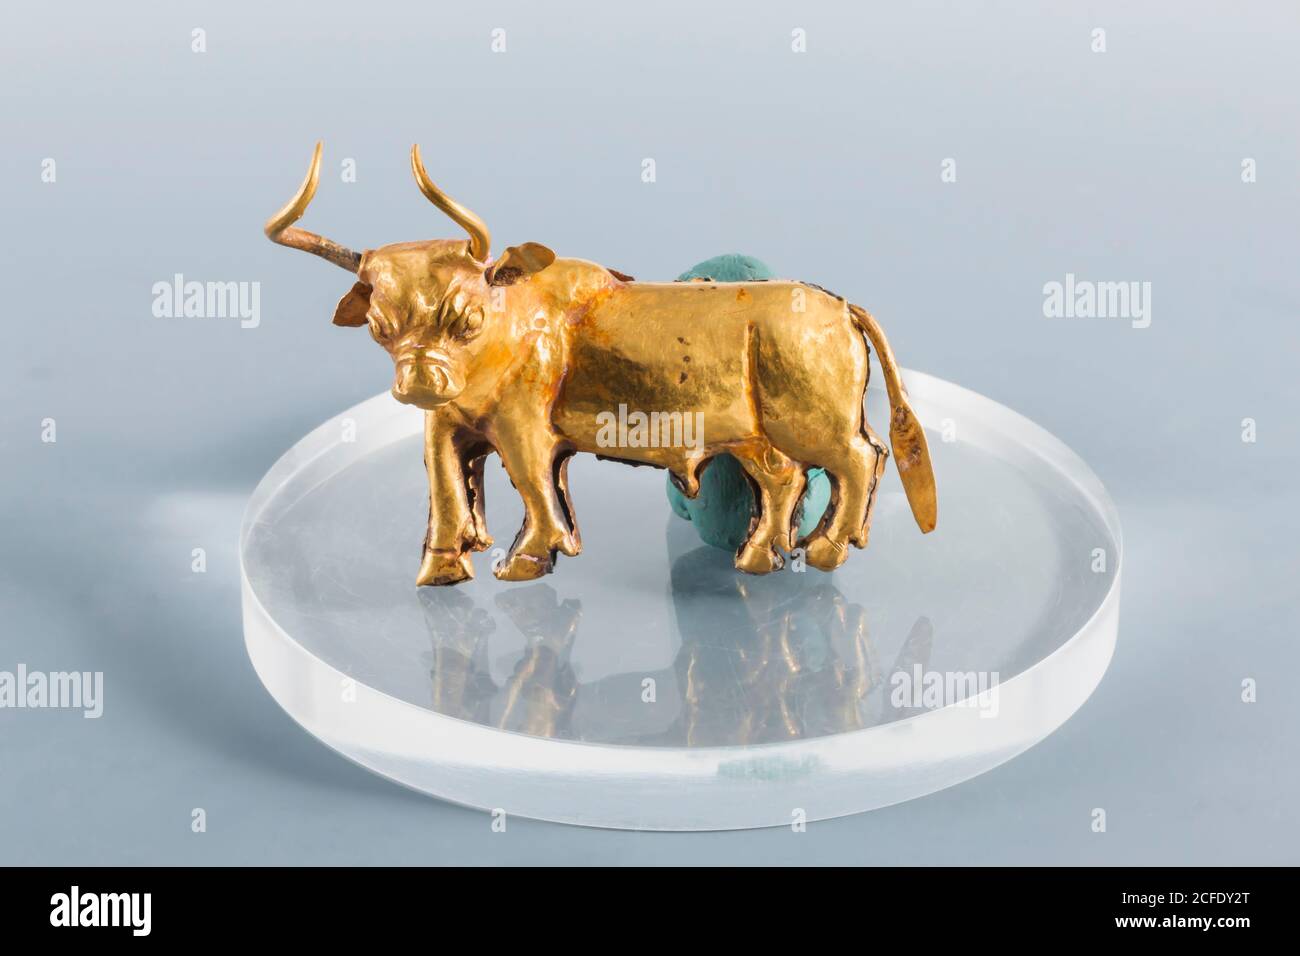 Gold Bull statue, from Quetta, Indus valley civilization (valuables vault), National Museum of Pakistan, Karachi, Sindh, Pakistan, South Asia, Asia Stock Photo